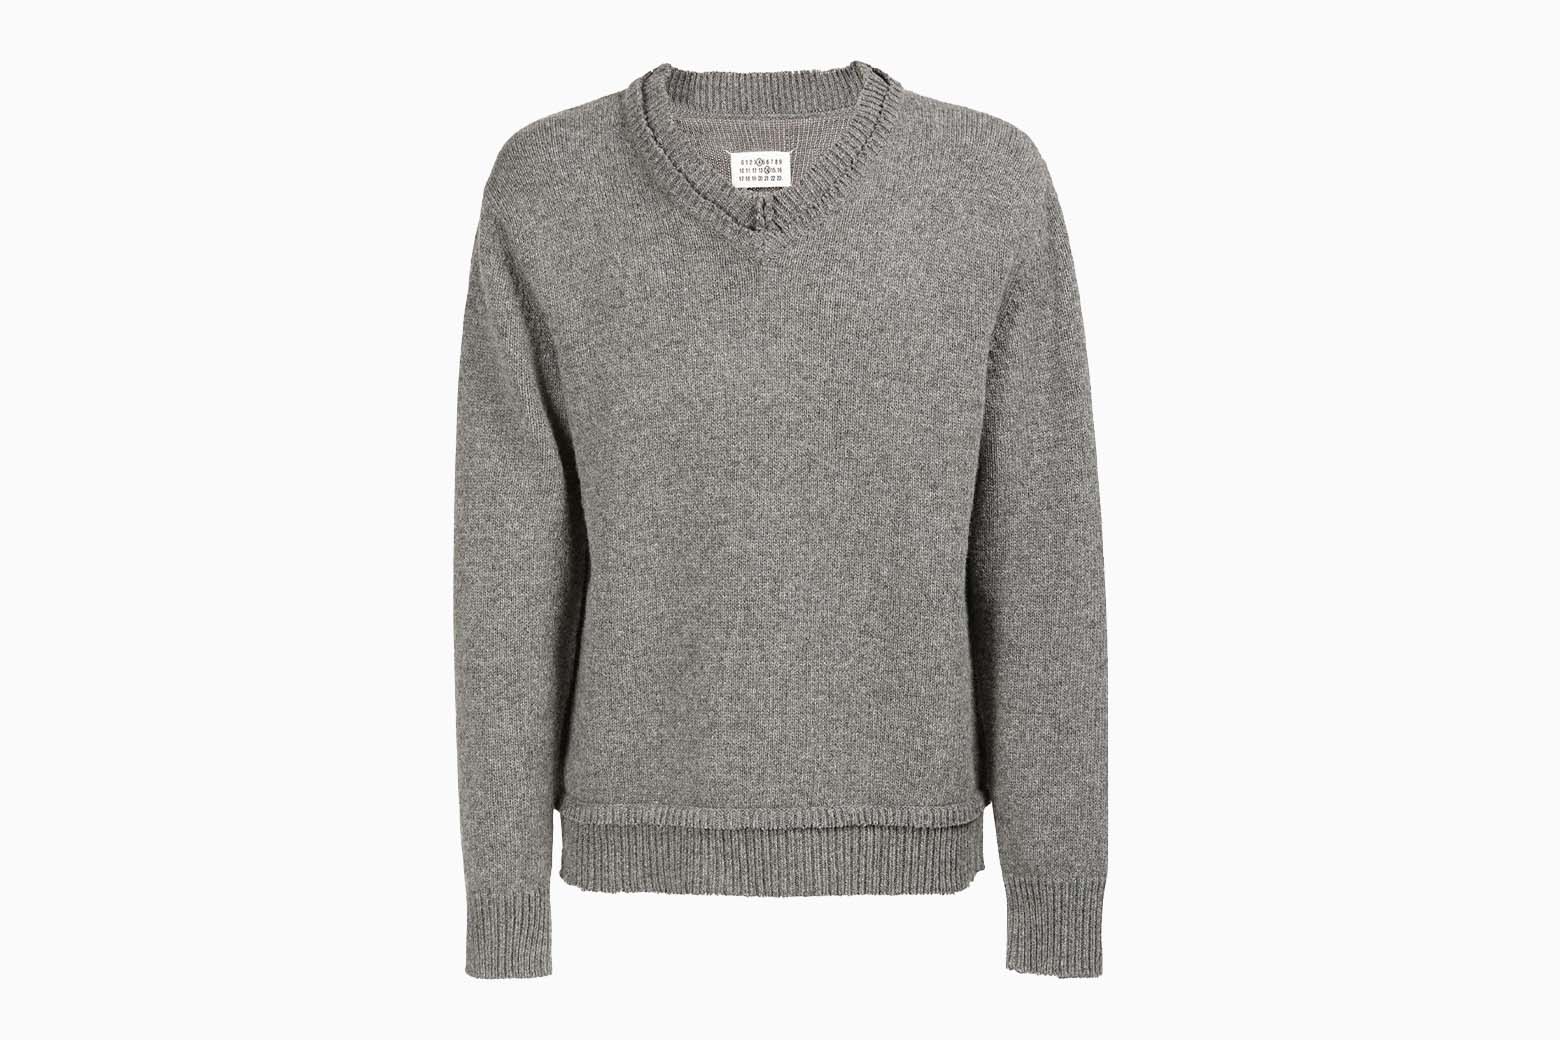 25 Best Sweaters For Men: Instantly Upgrade Your Style